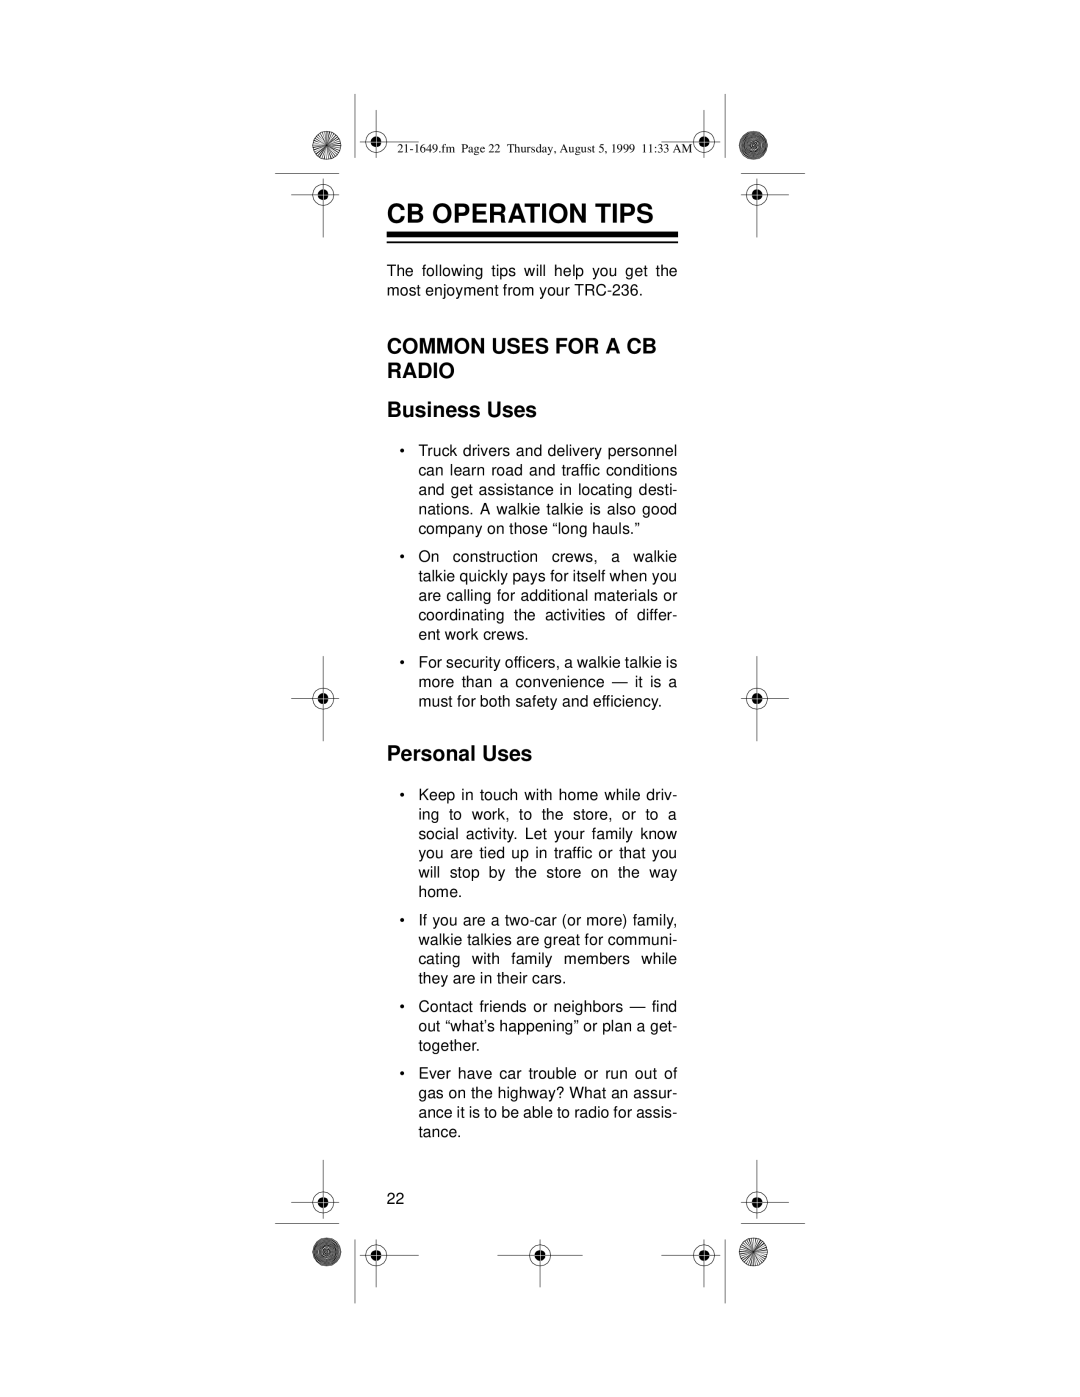 Radio Shack TRC-236 owner manual Cb Operation Tips, COMMON USES FOR A CB RADIO Business Uses, Personal Uses 